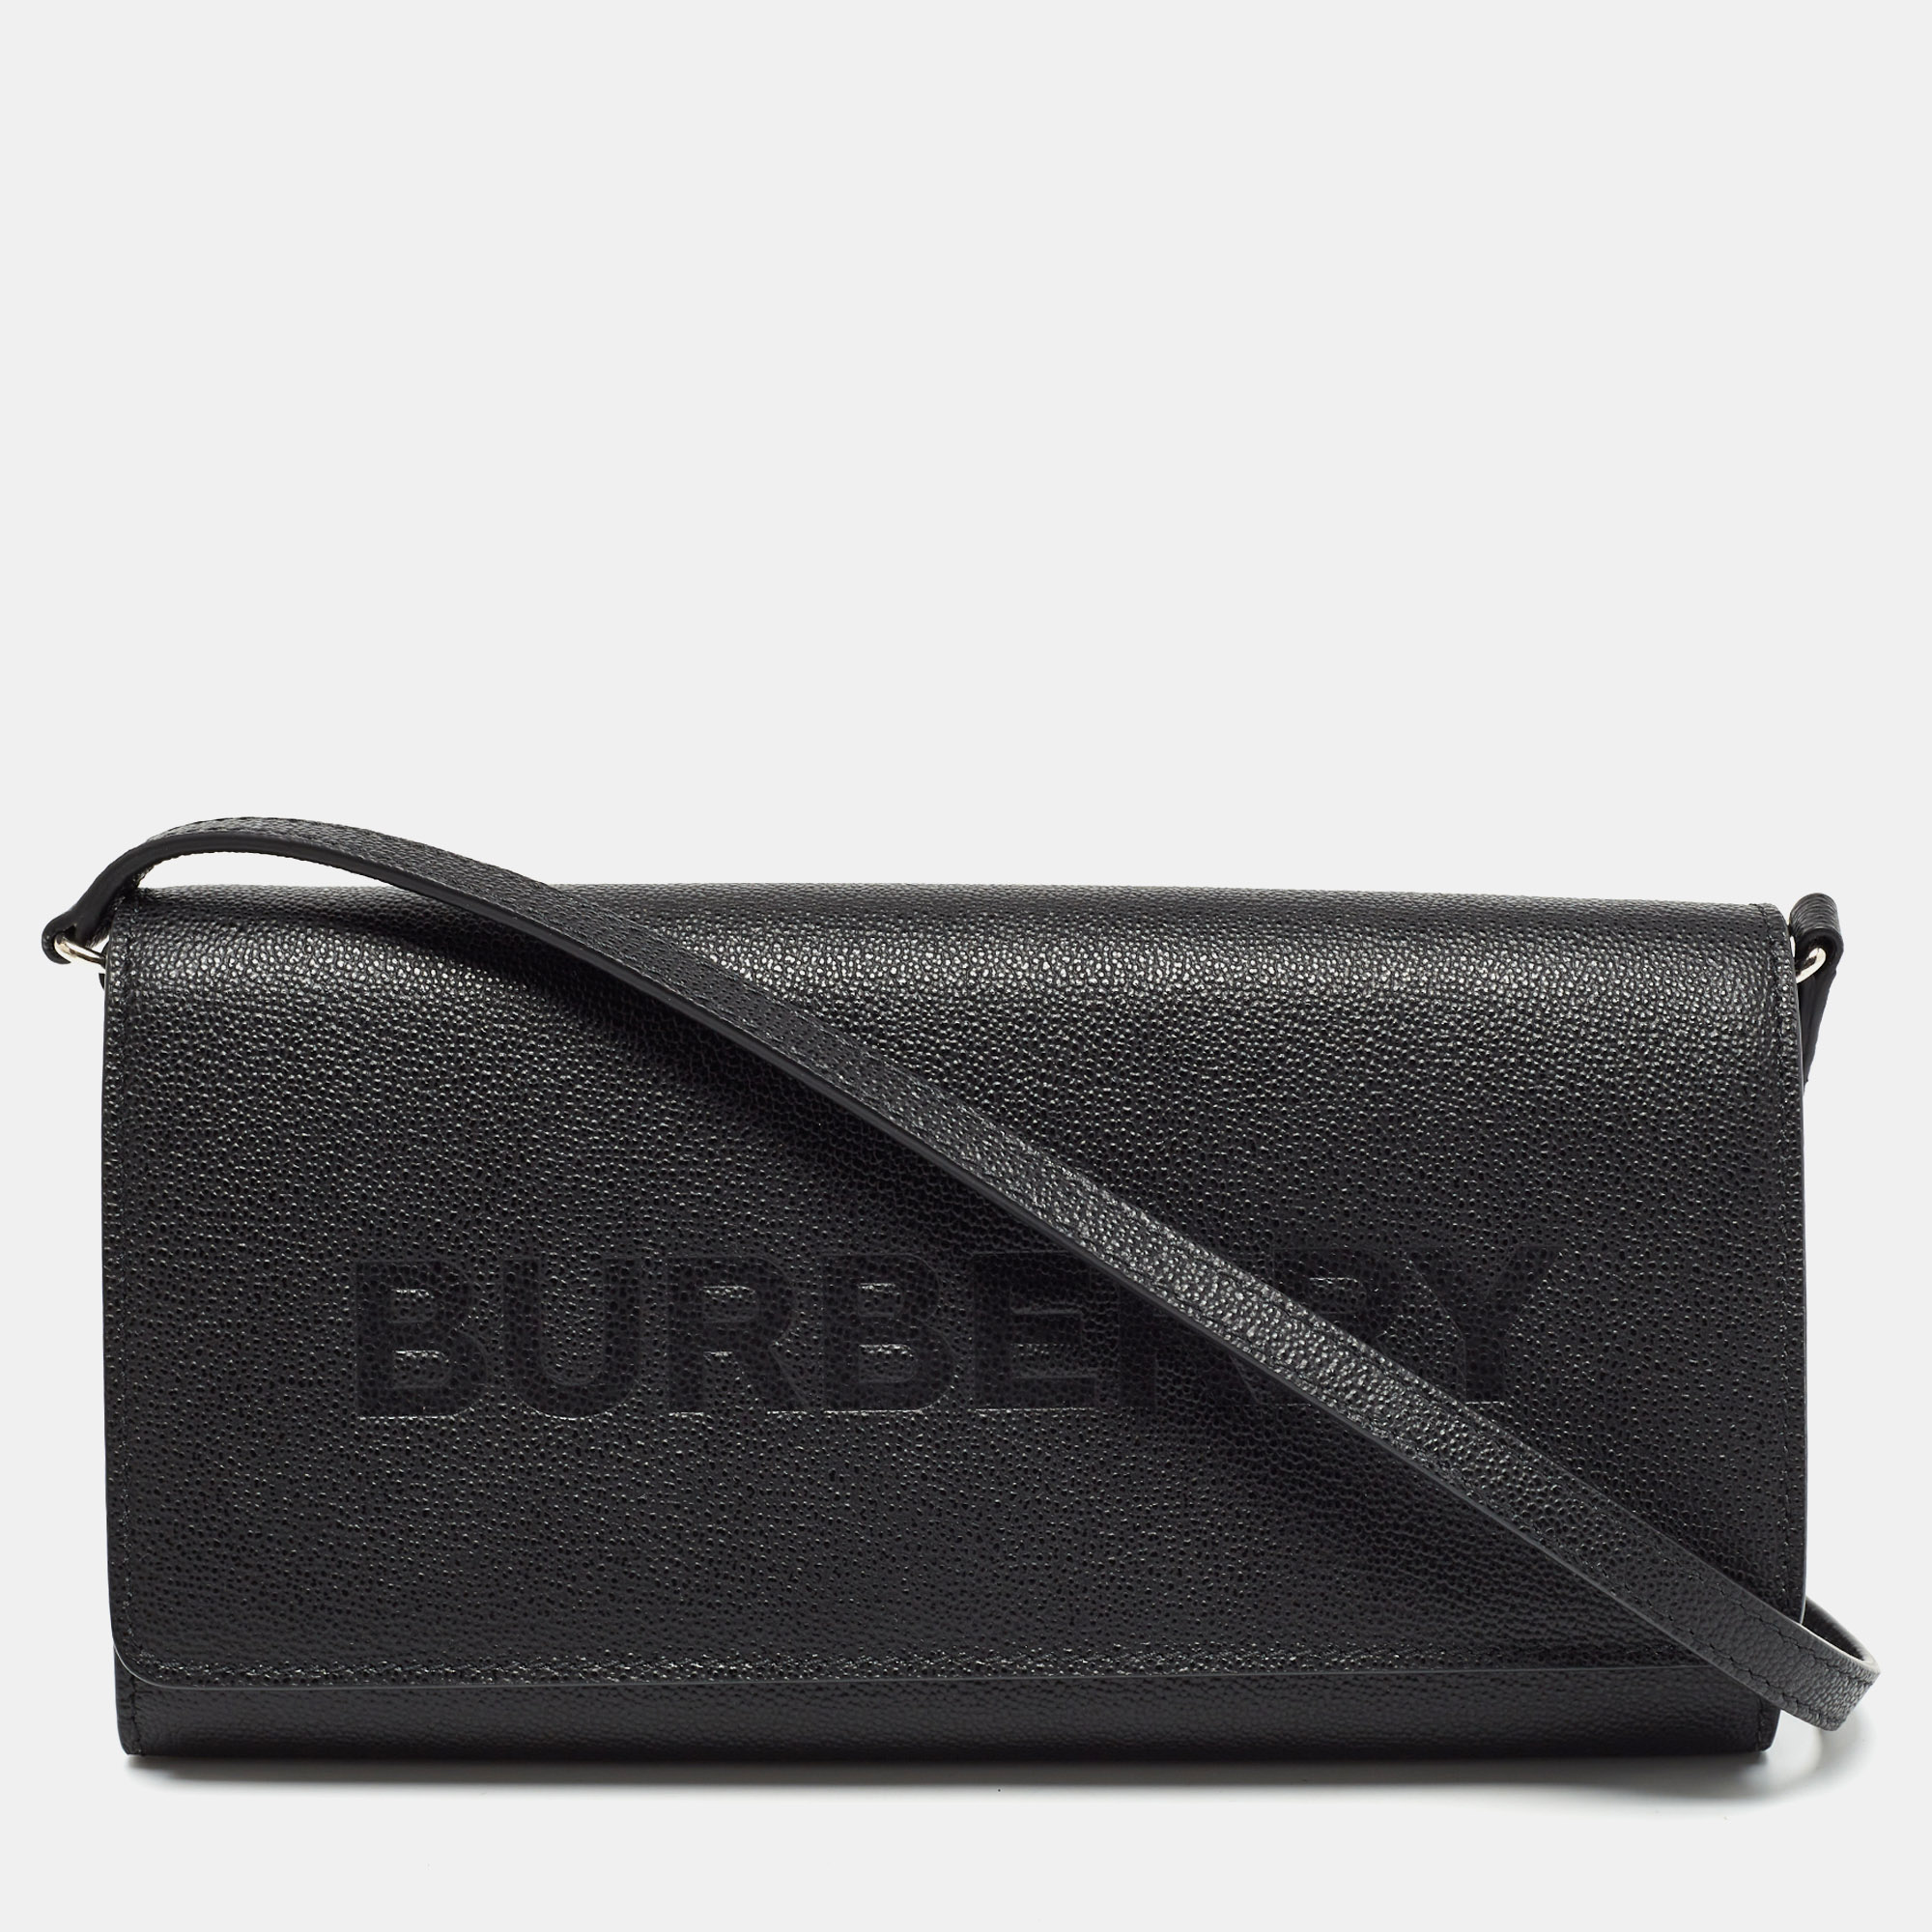 Pre-owned Burberry Black Leather Henley Crossbody Bag